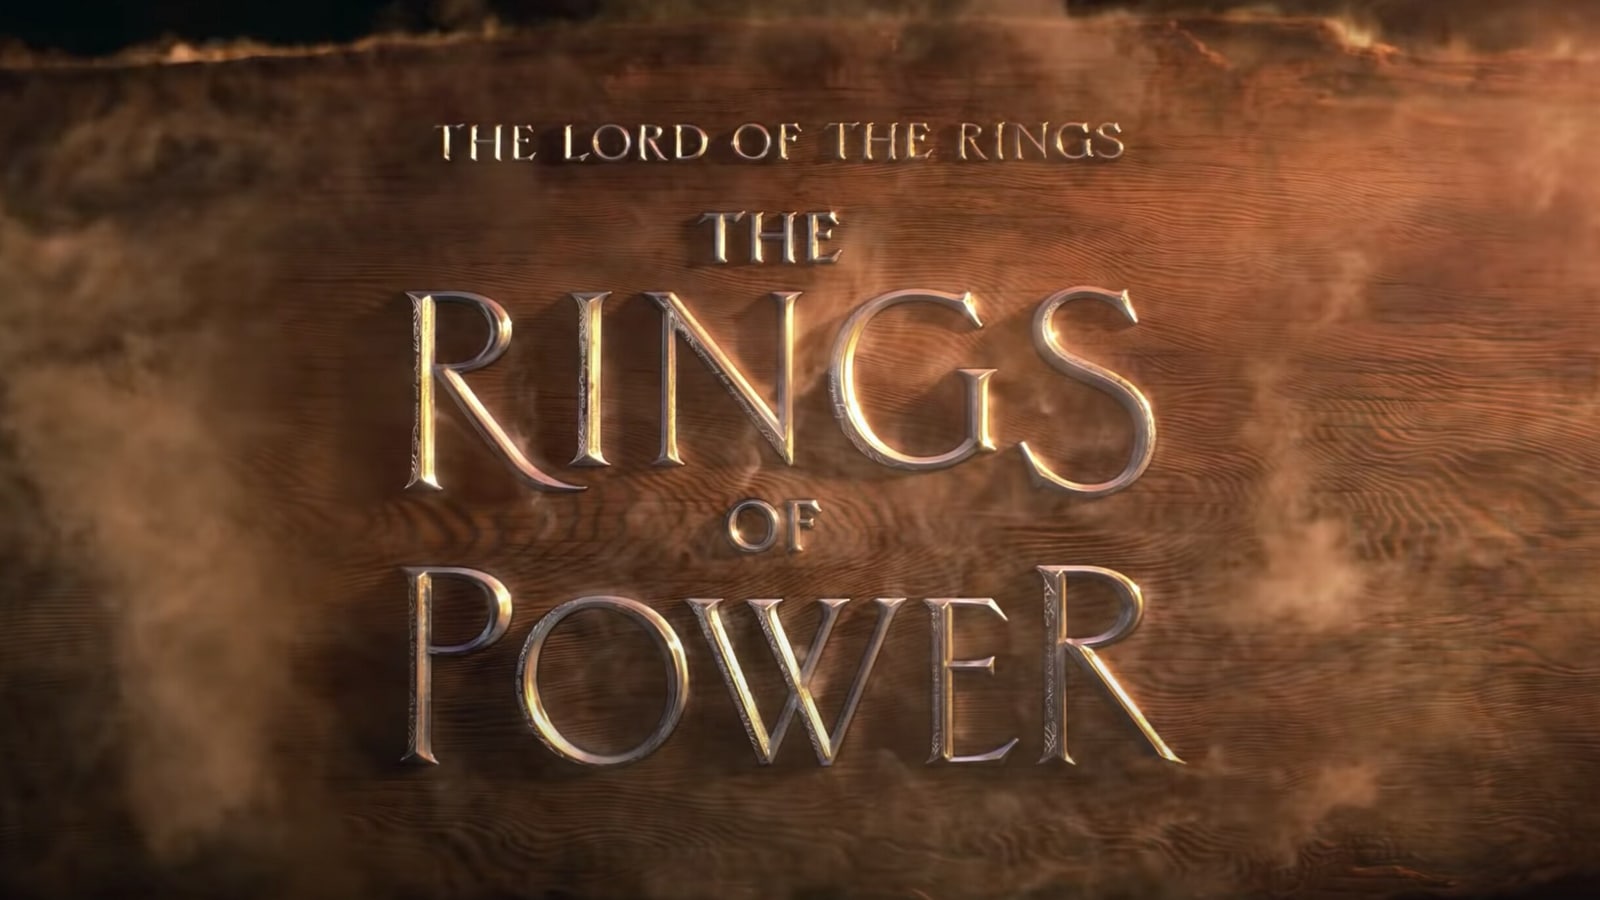 Introducing the majestic realms of Middle-earth ✨ Watch #TheRingsOfPower  NOW ⚔️ Available in English, Hindi, Tamil, Telugu, Kannad... | Instagram